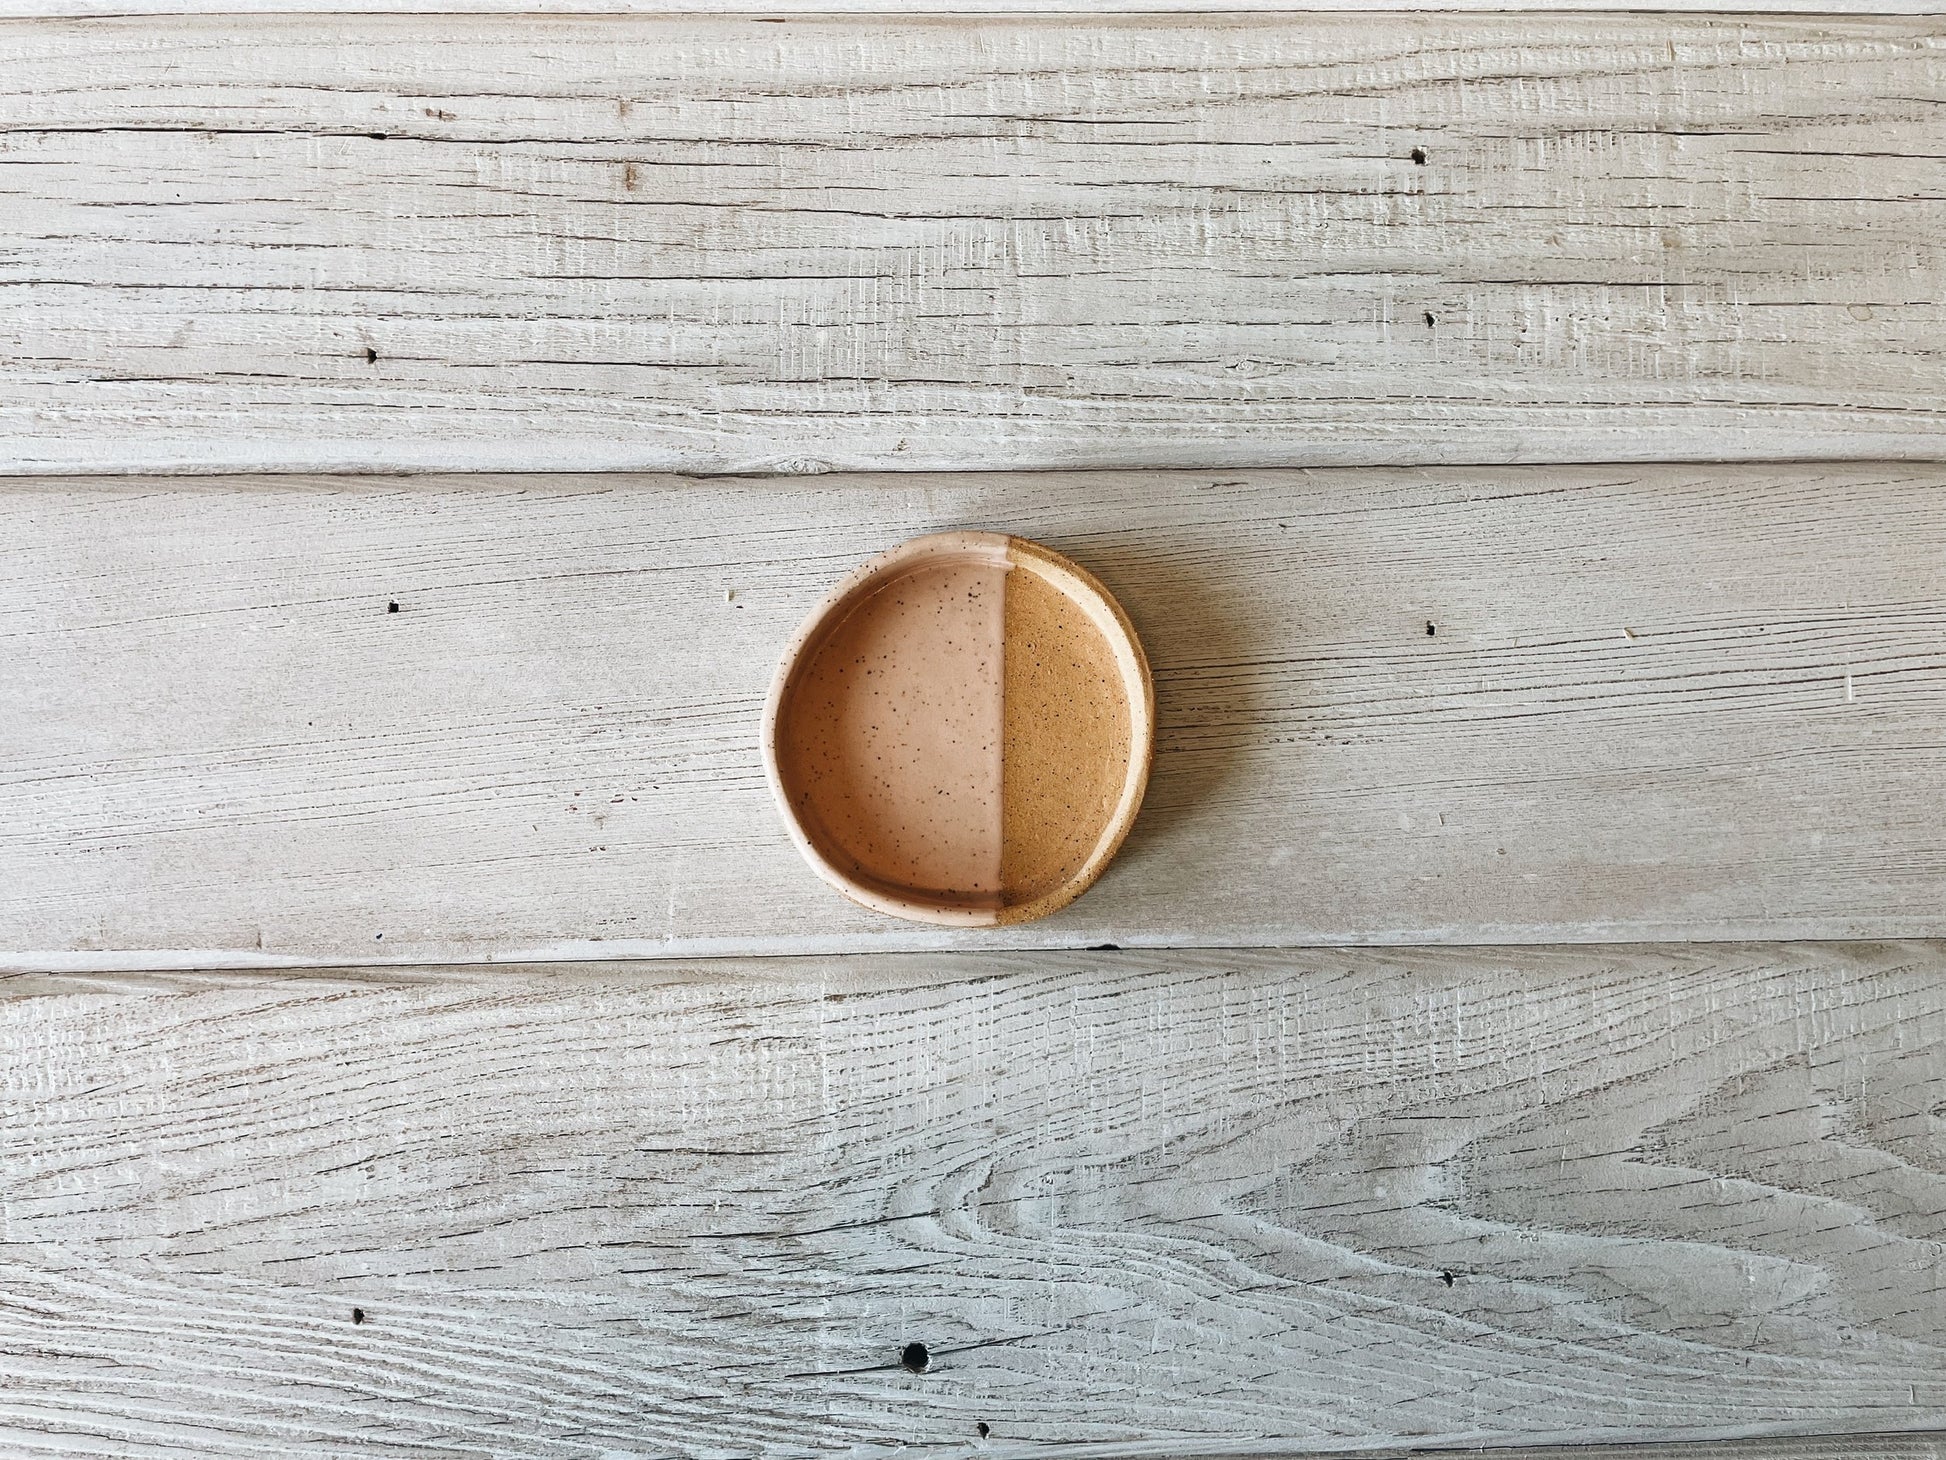 Half dipped ceramic dish on wooden table.